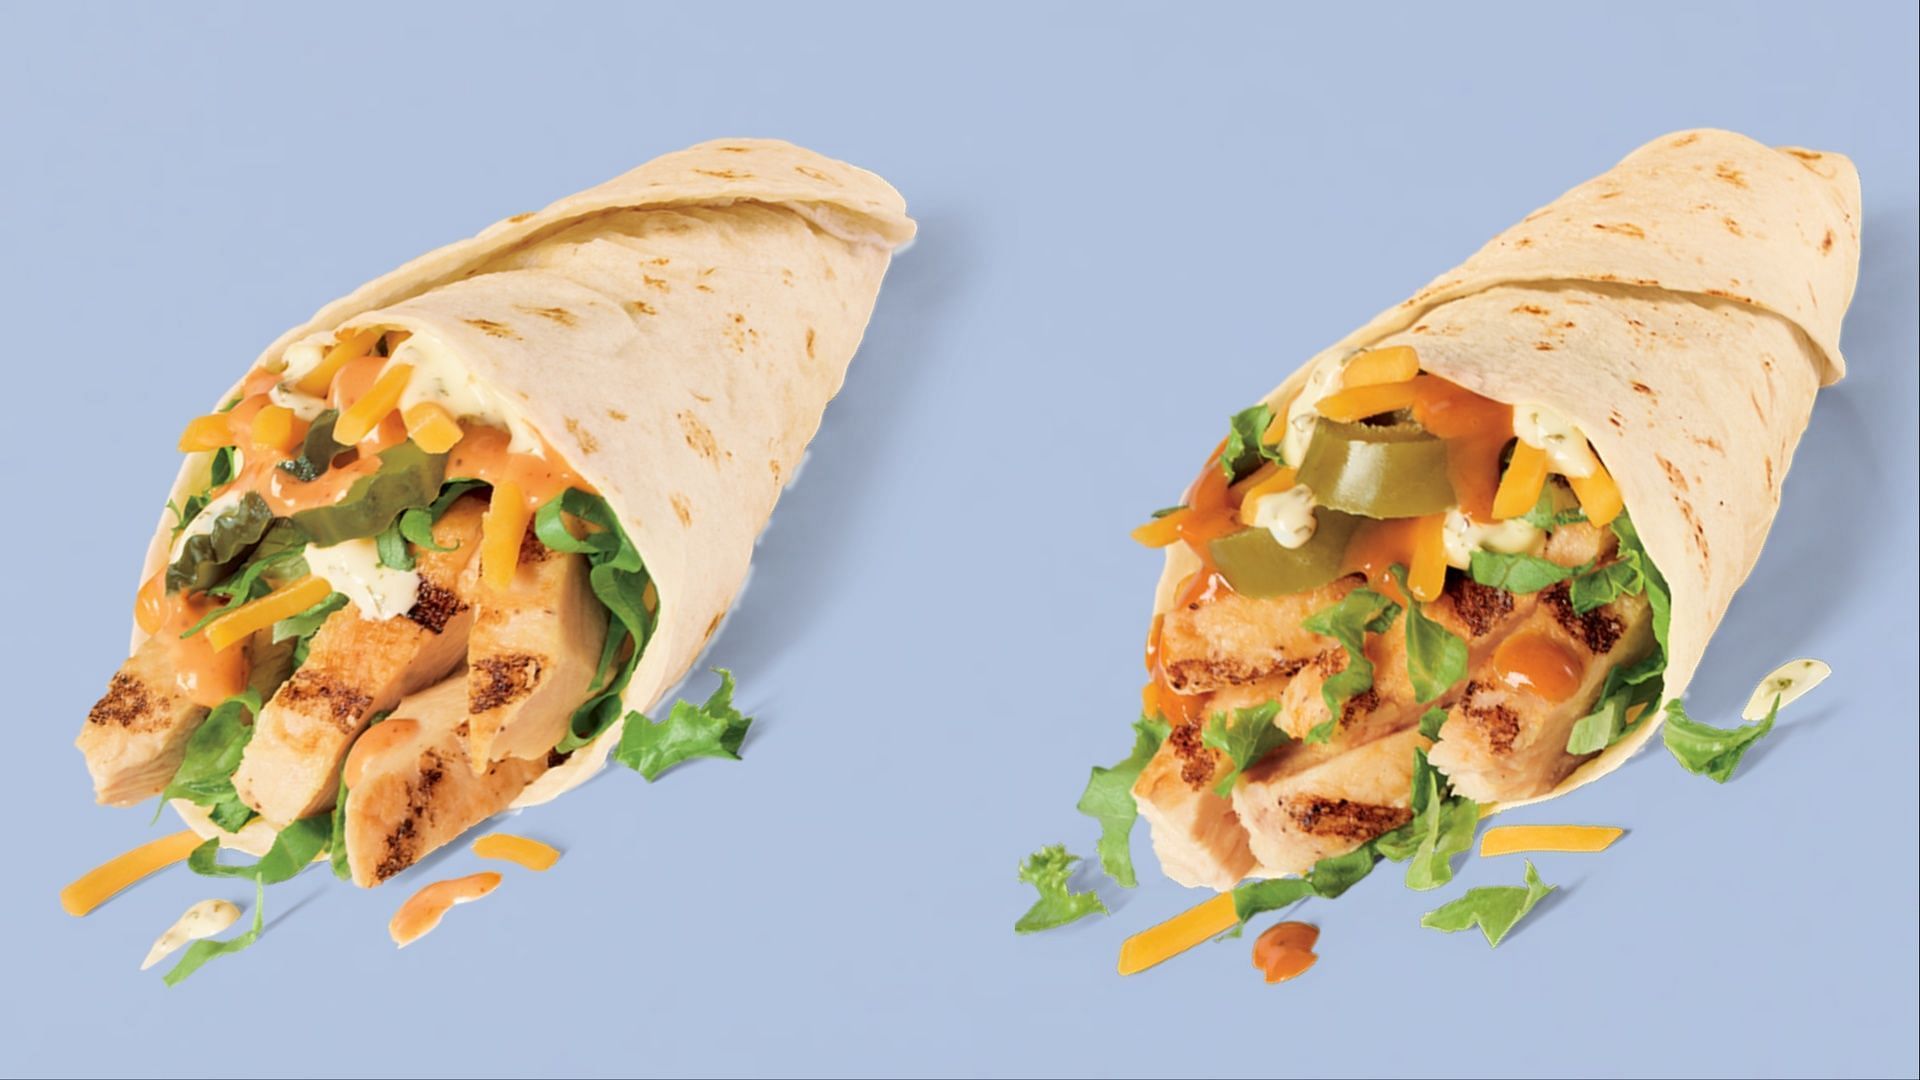 The new Spicy and Classic Grilled Chicken Wraps start at $3 each and can be enjoyed for a limited time (Image via Jack in the Box)